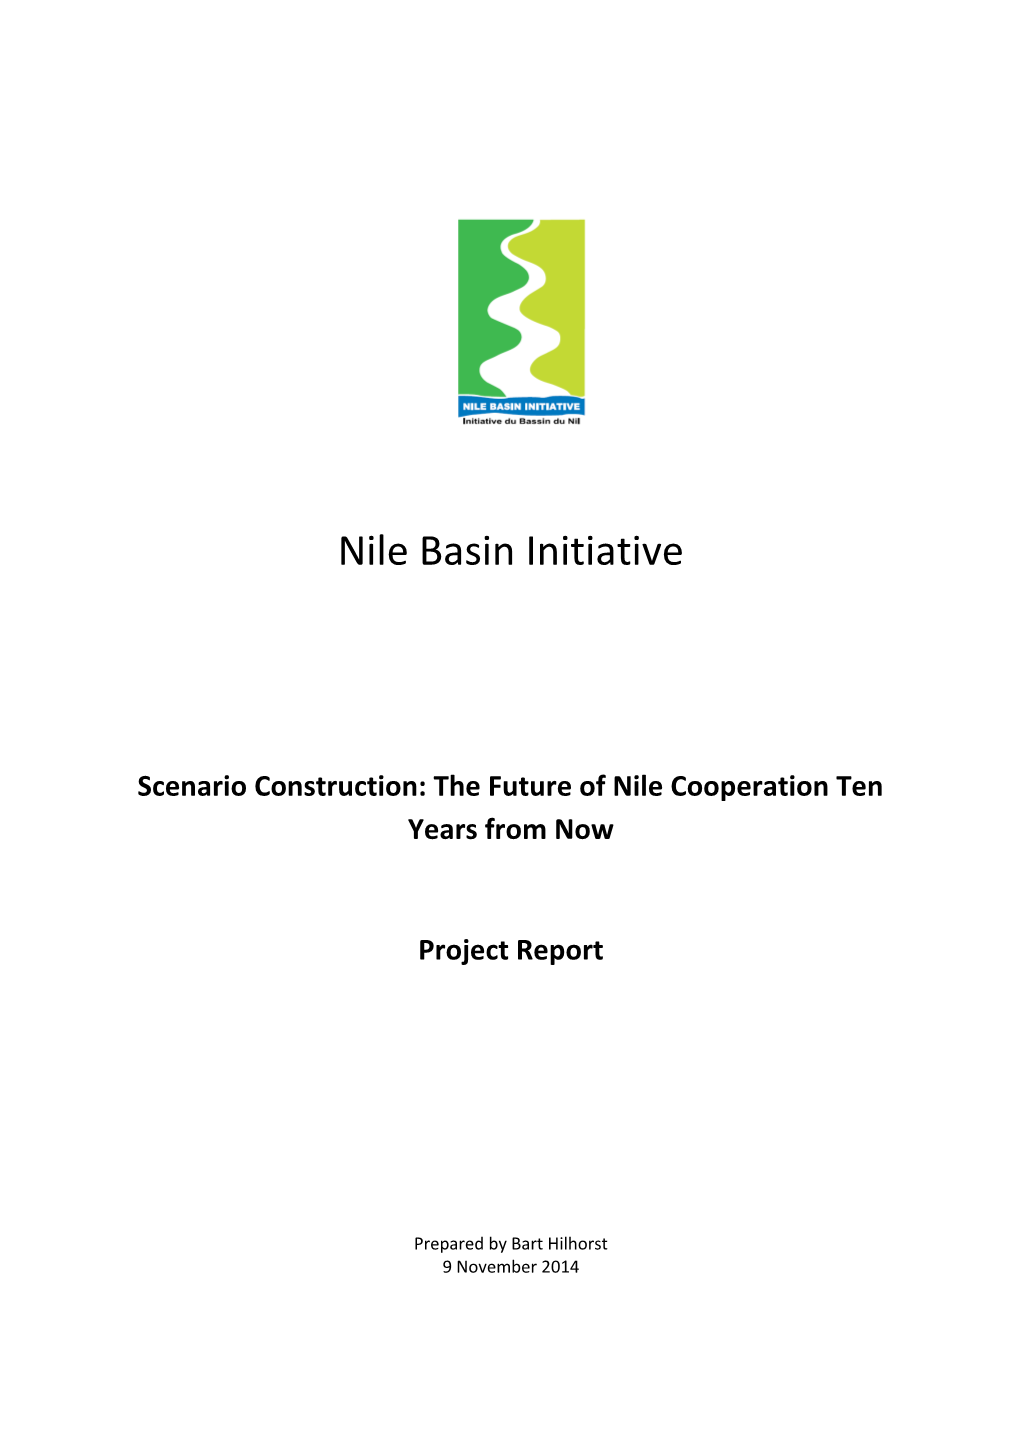 Scenario Construction: the Future of Nile Cooperation Ten Years from Now